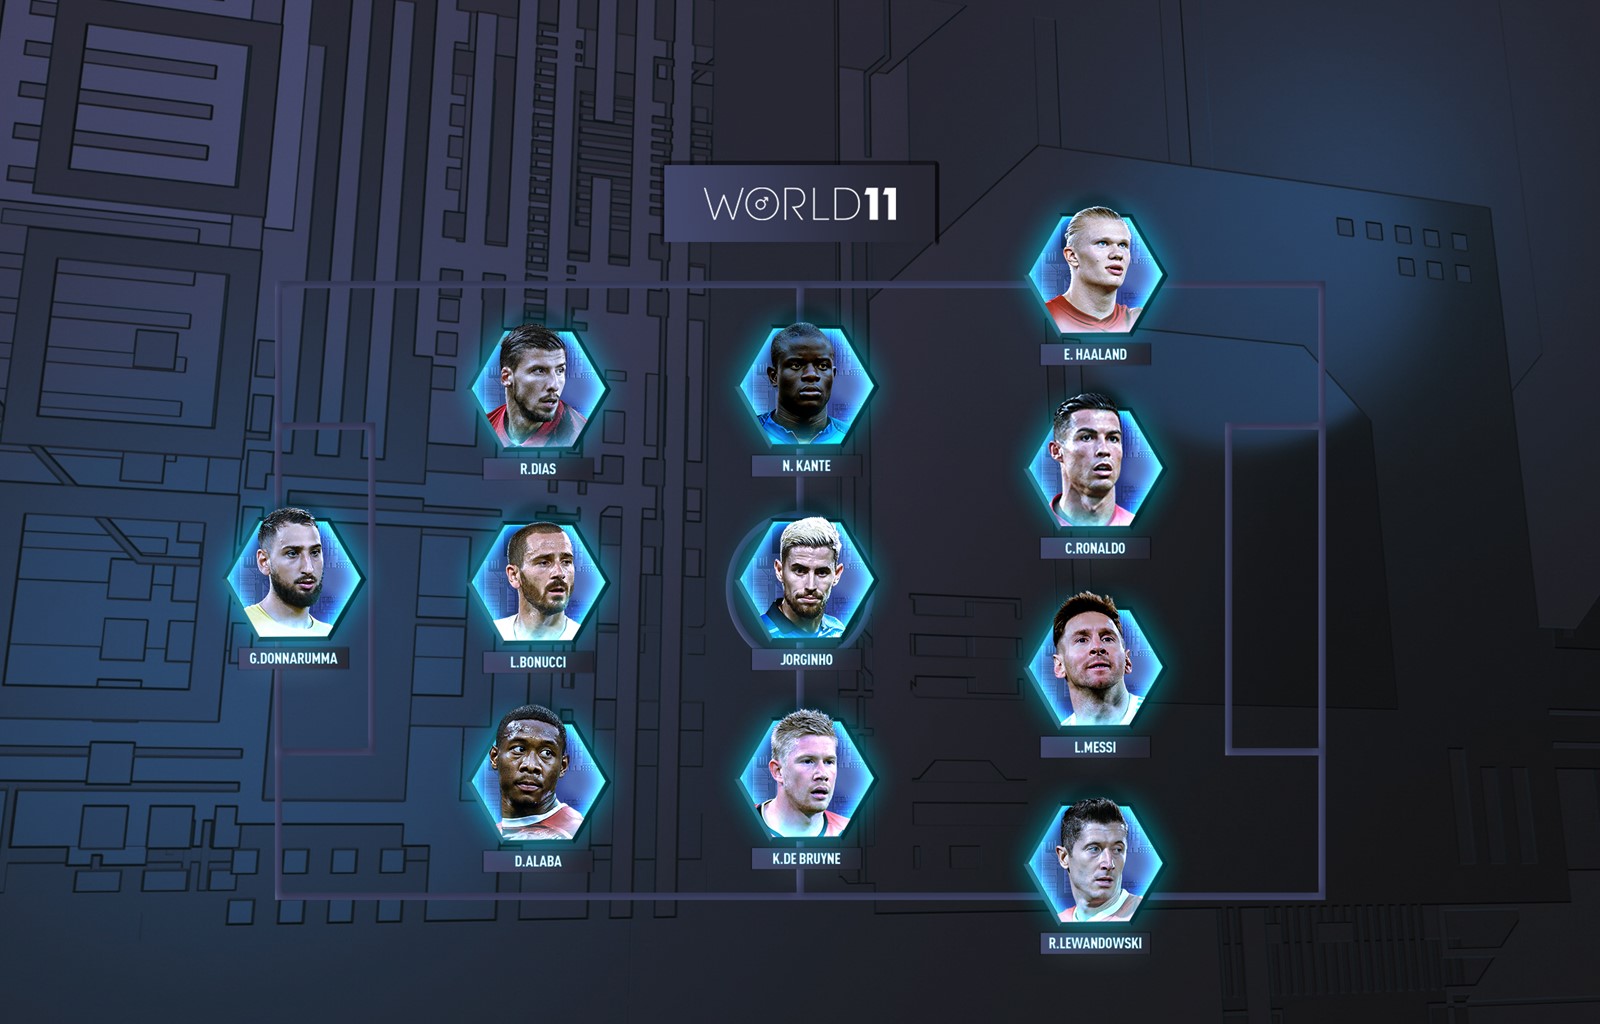 World XI: Check Out FIFA World Men's 11